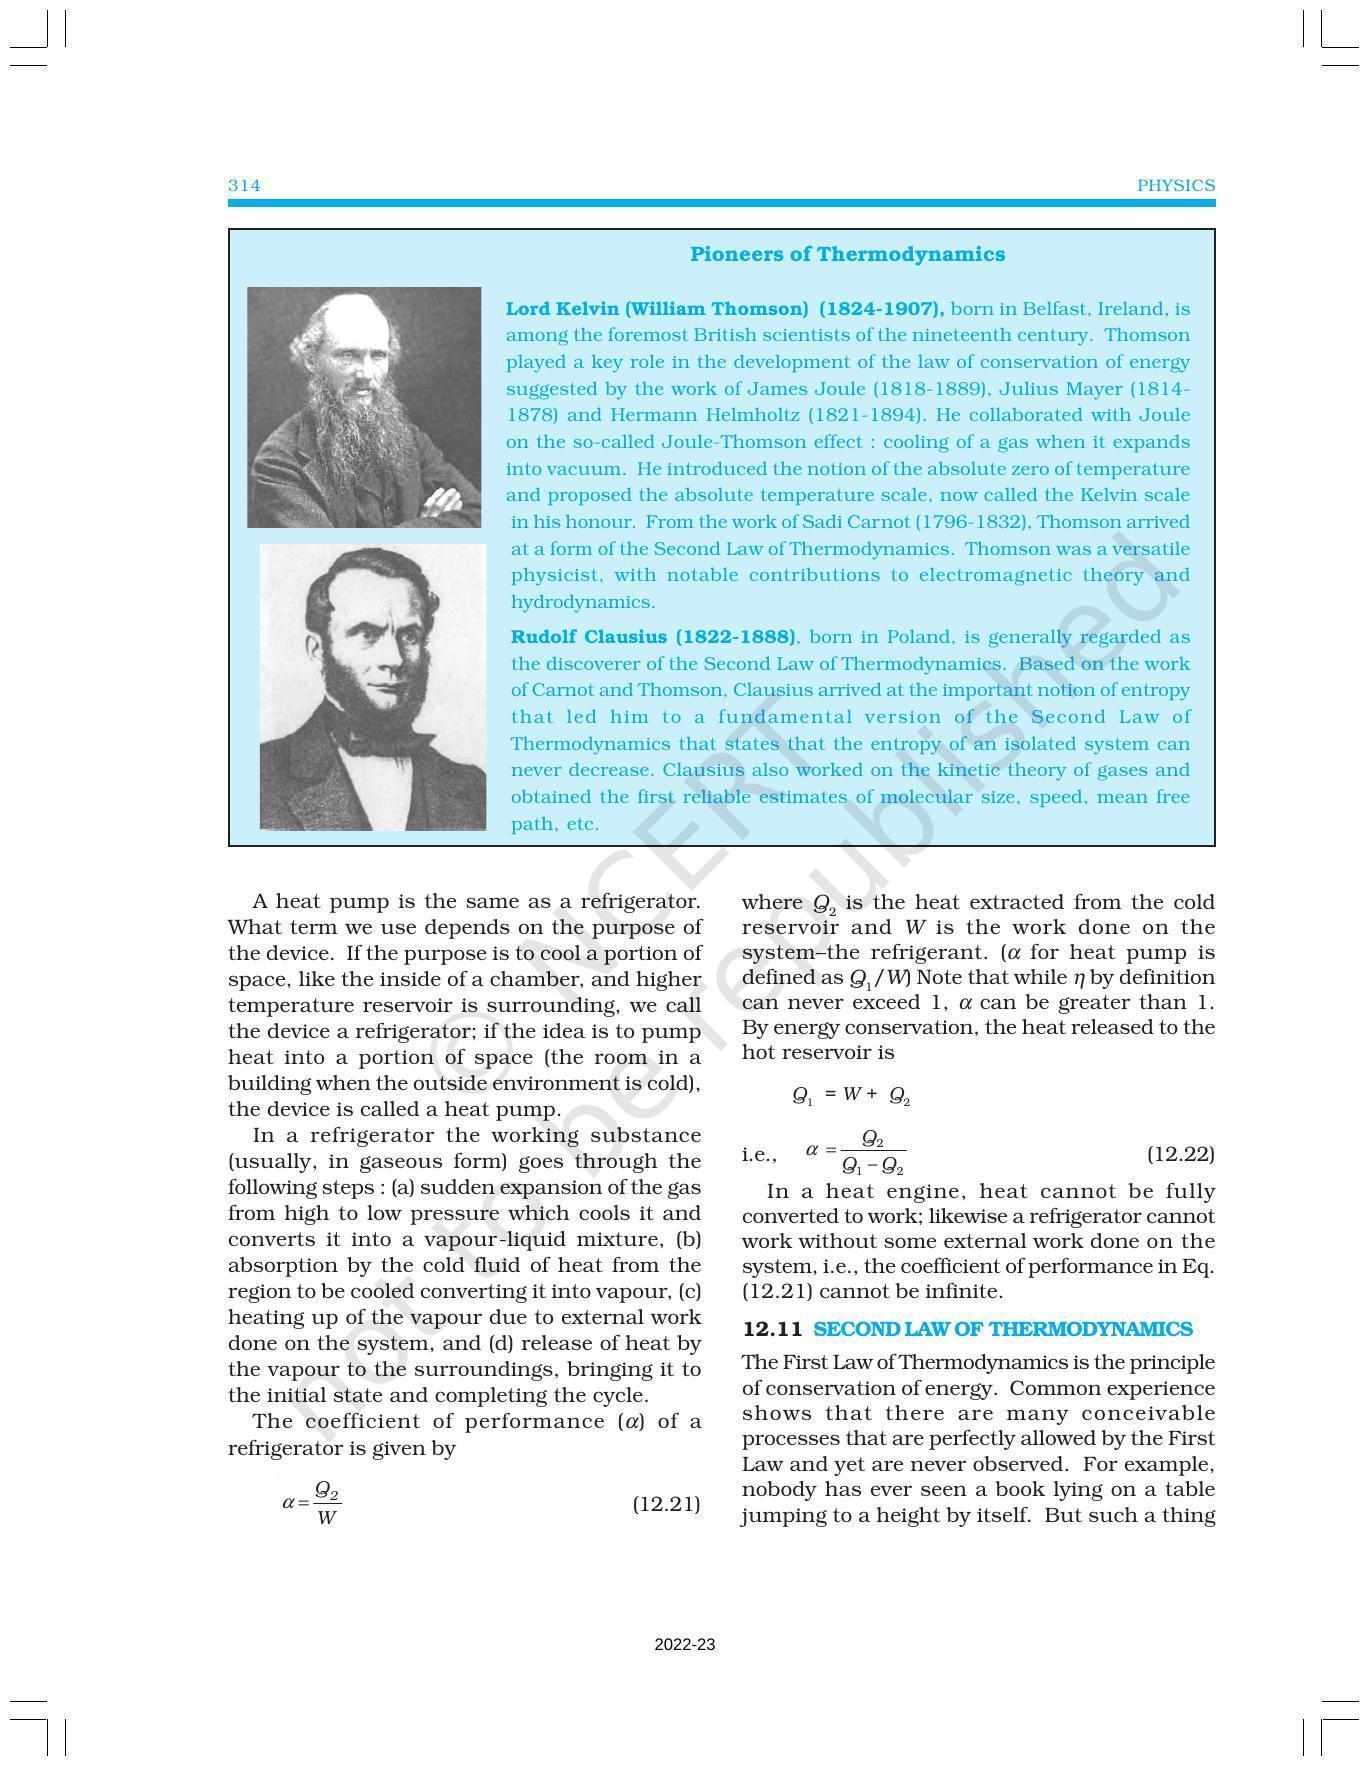 NCERT Book for Class 11 Physics Chapter 12 Thermodynamics - Page 12